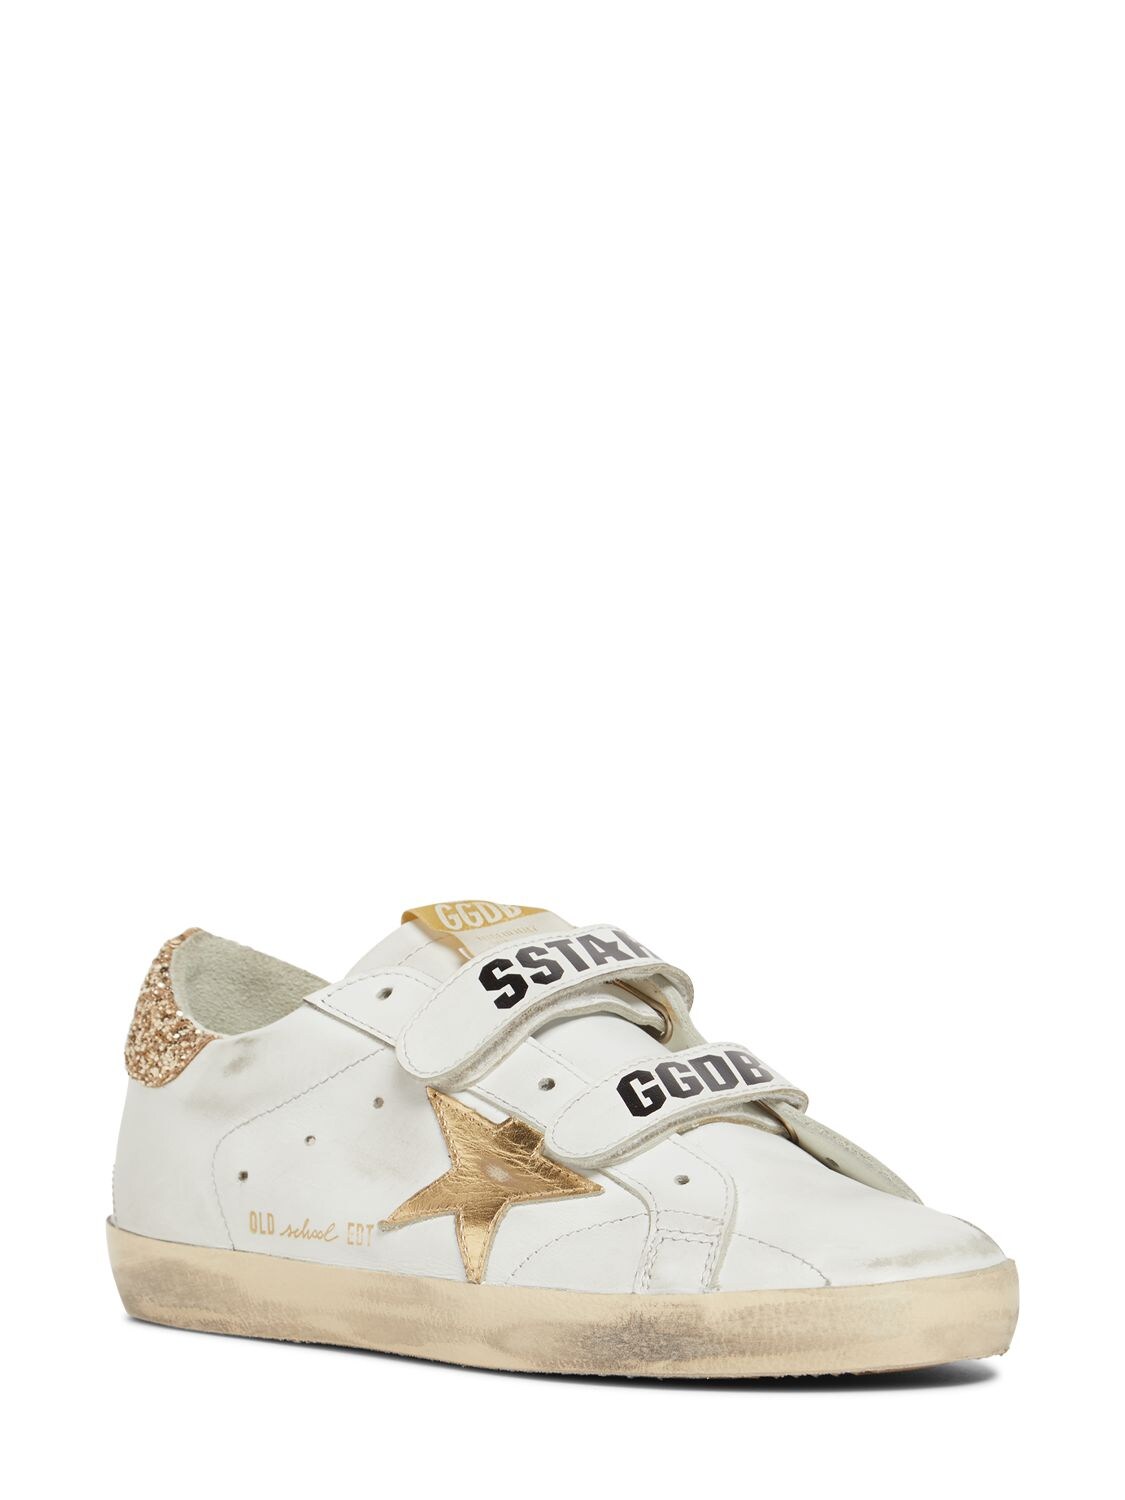 Shop Golden Goose 20mm Old School Leather Sneakers In White,gold